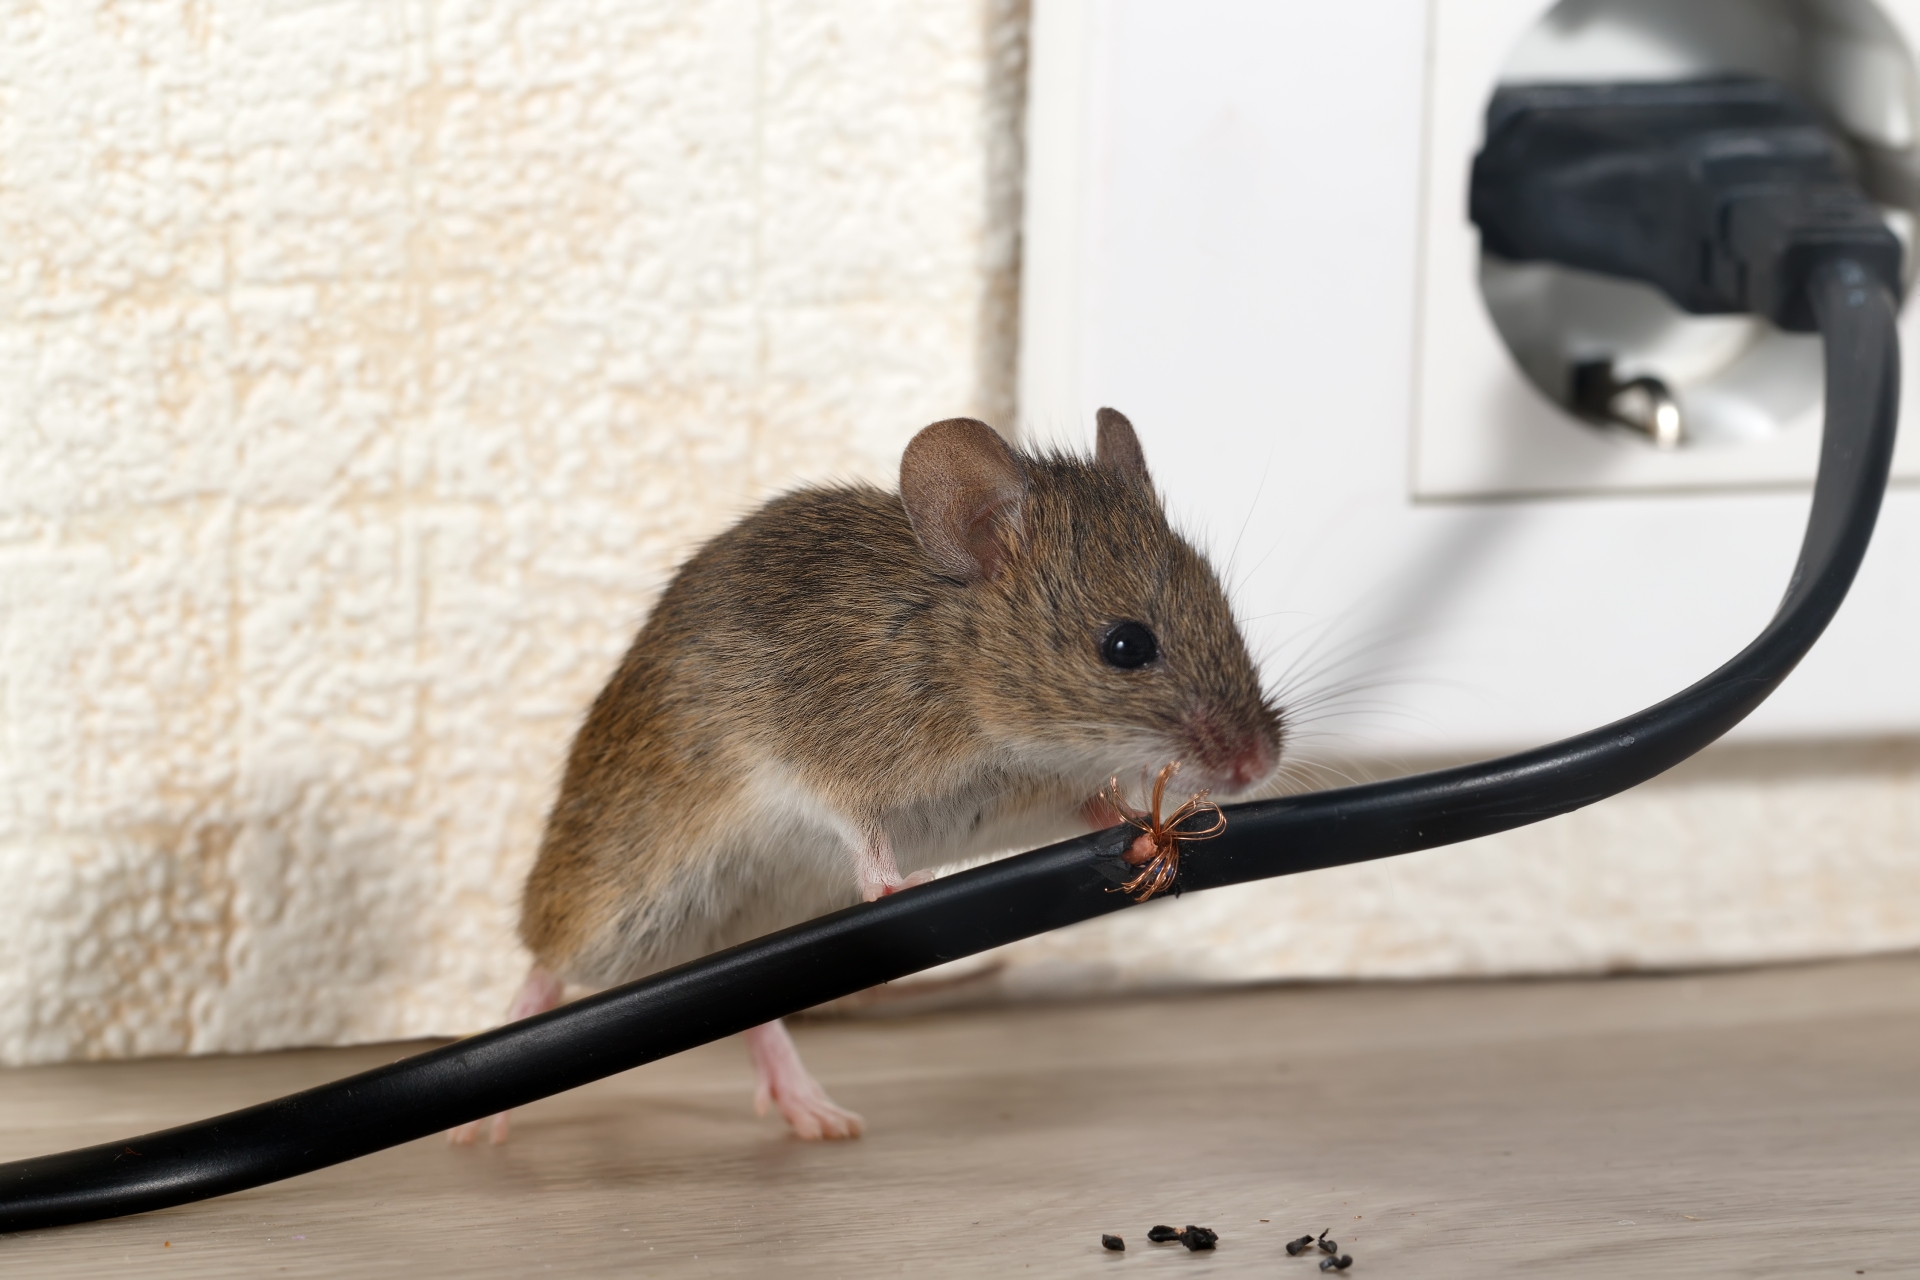 Mice Infestation, Pest Control in Acton, W3. Call Now 020 8166 9746